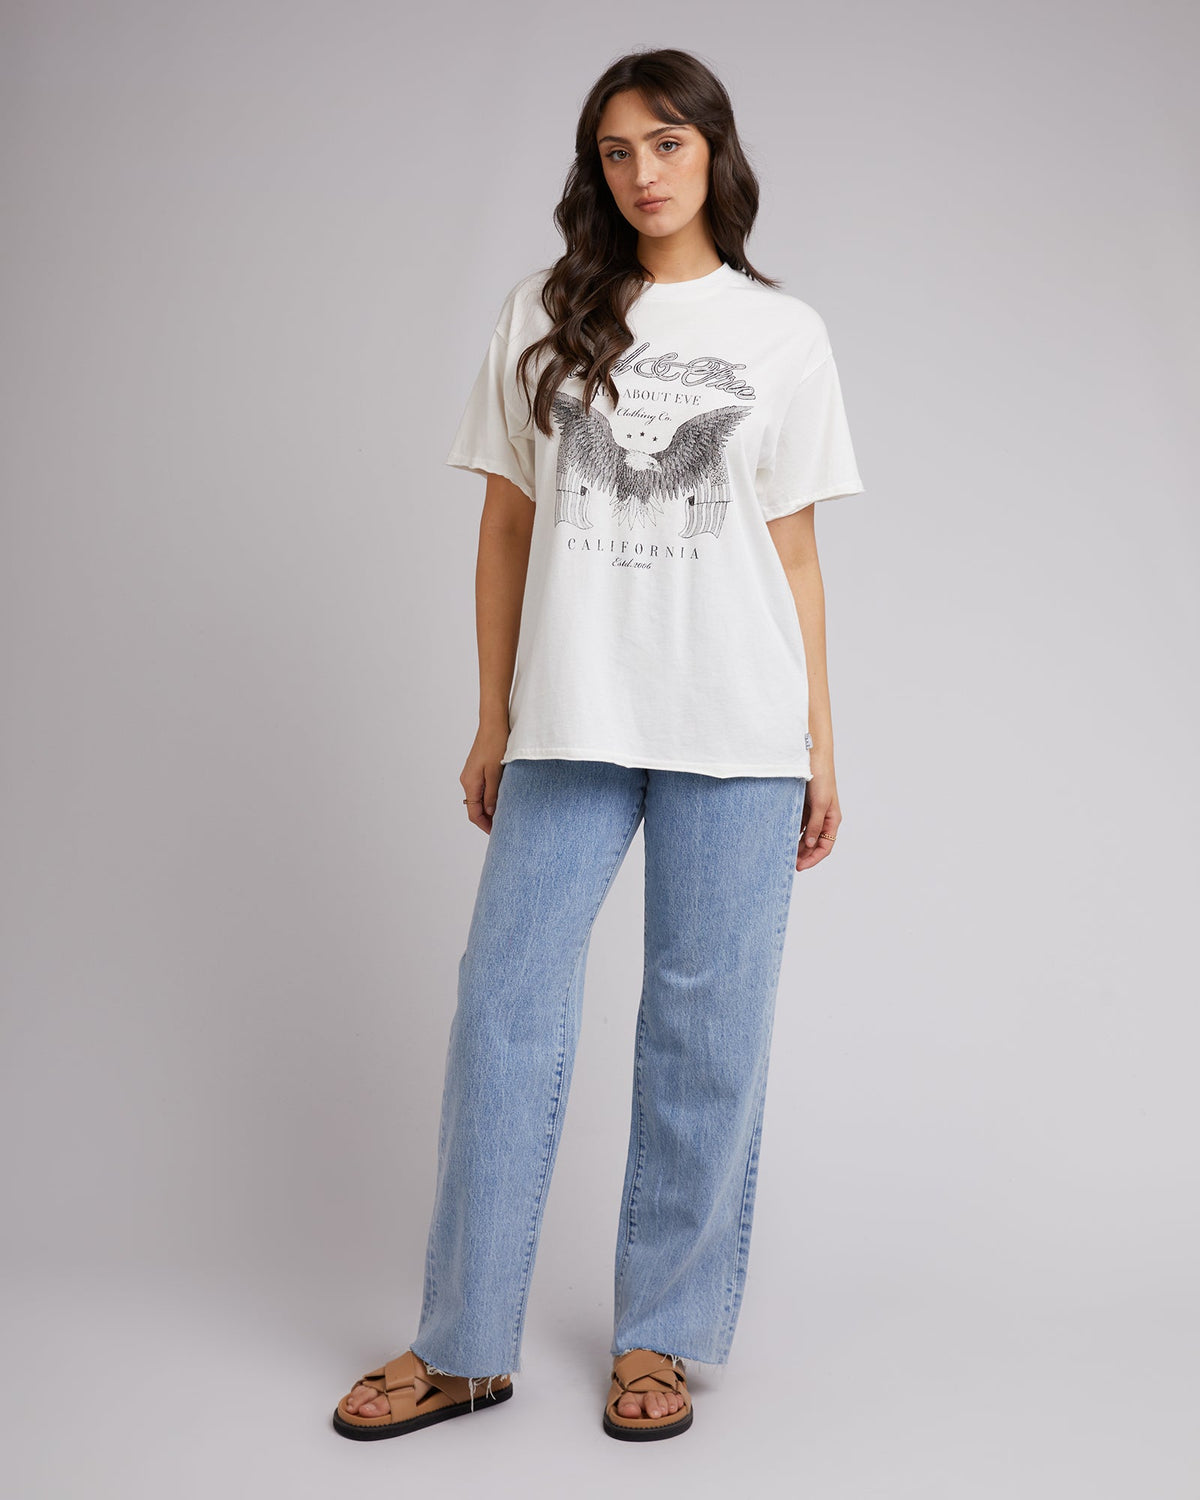 All About Eve-Brooks Tee Vintage White-Edge Clothing